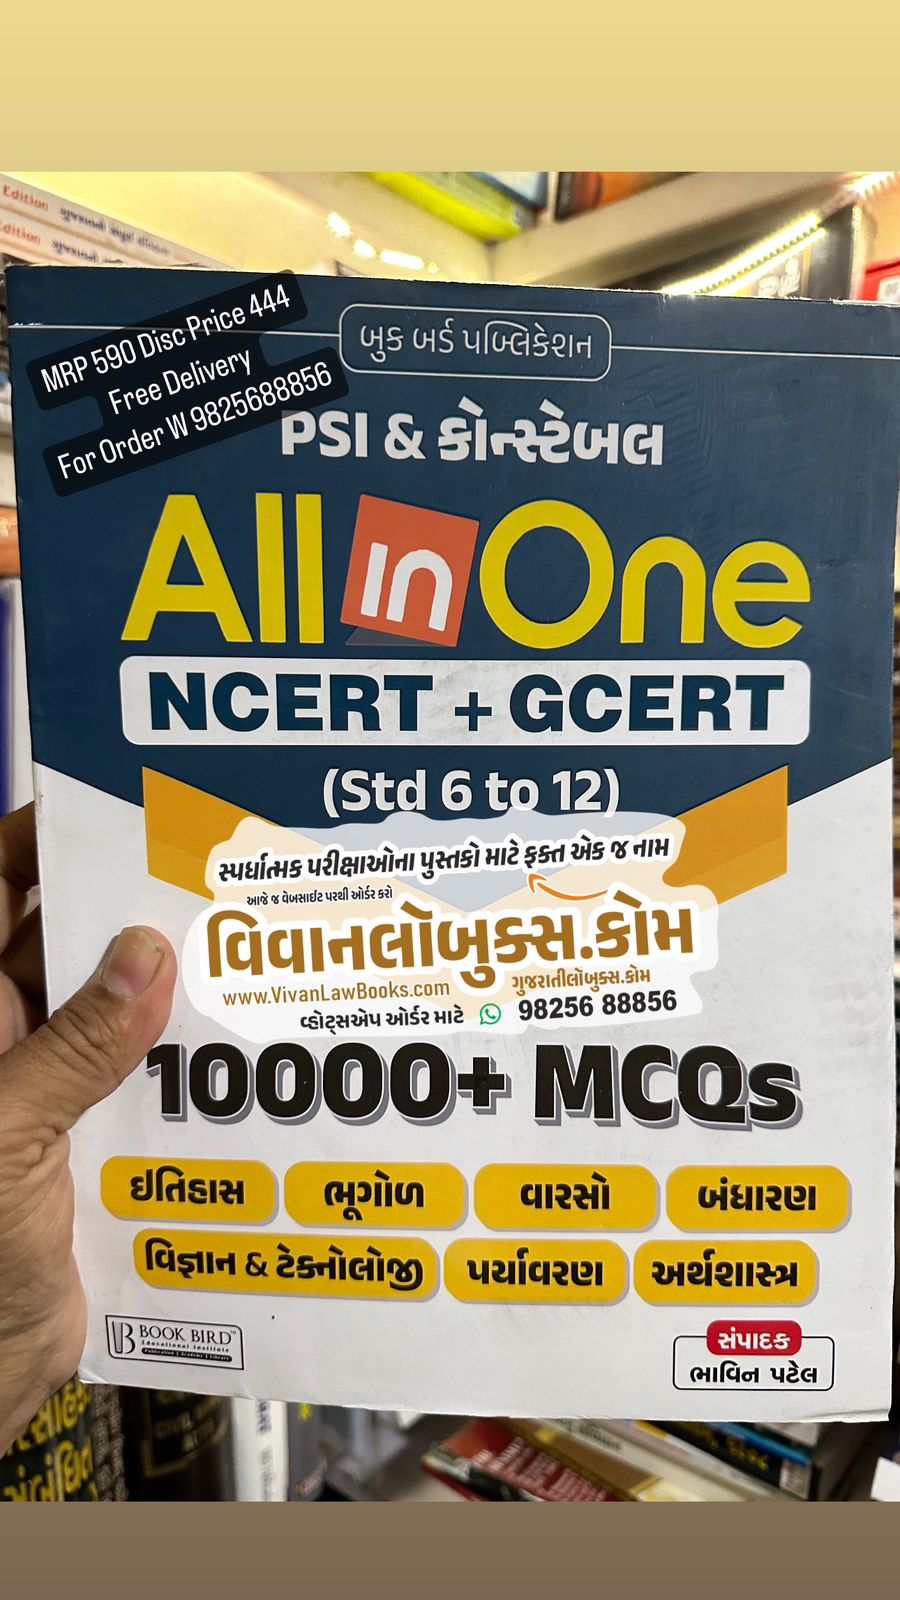 Book Bird's ALL IN ONE NCERT + GCERT (Dhoran 6 to 12) For PSI & Constable - 10000+ MCQs - Latest July 2024 Edition